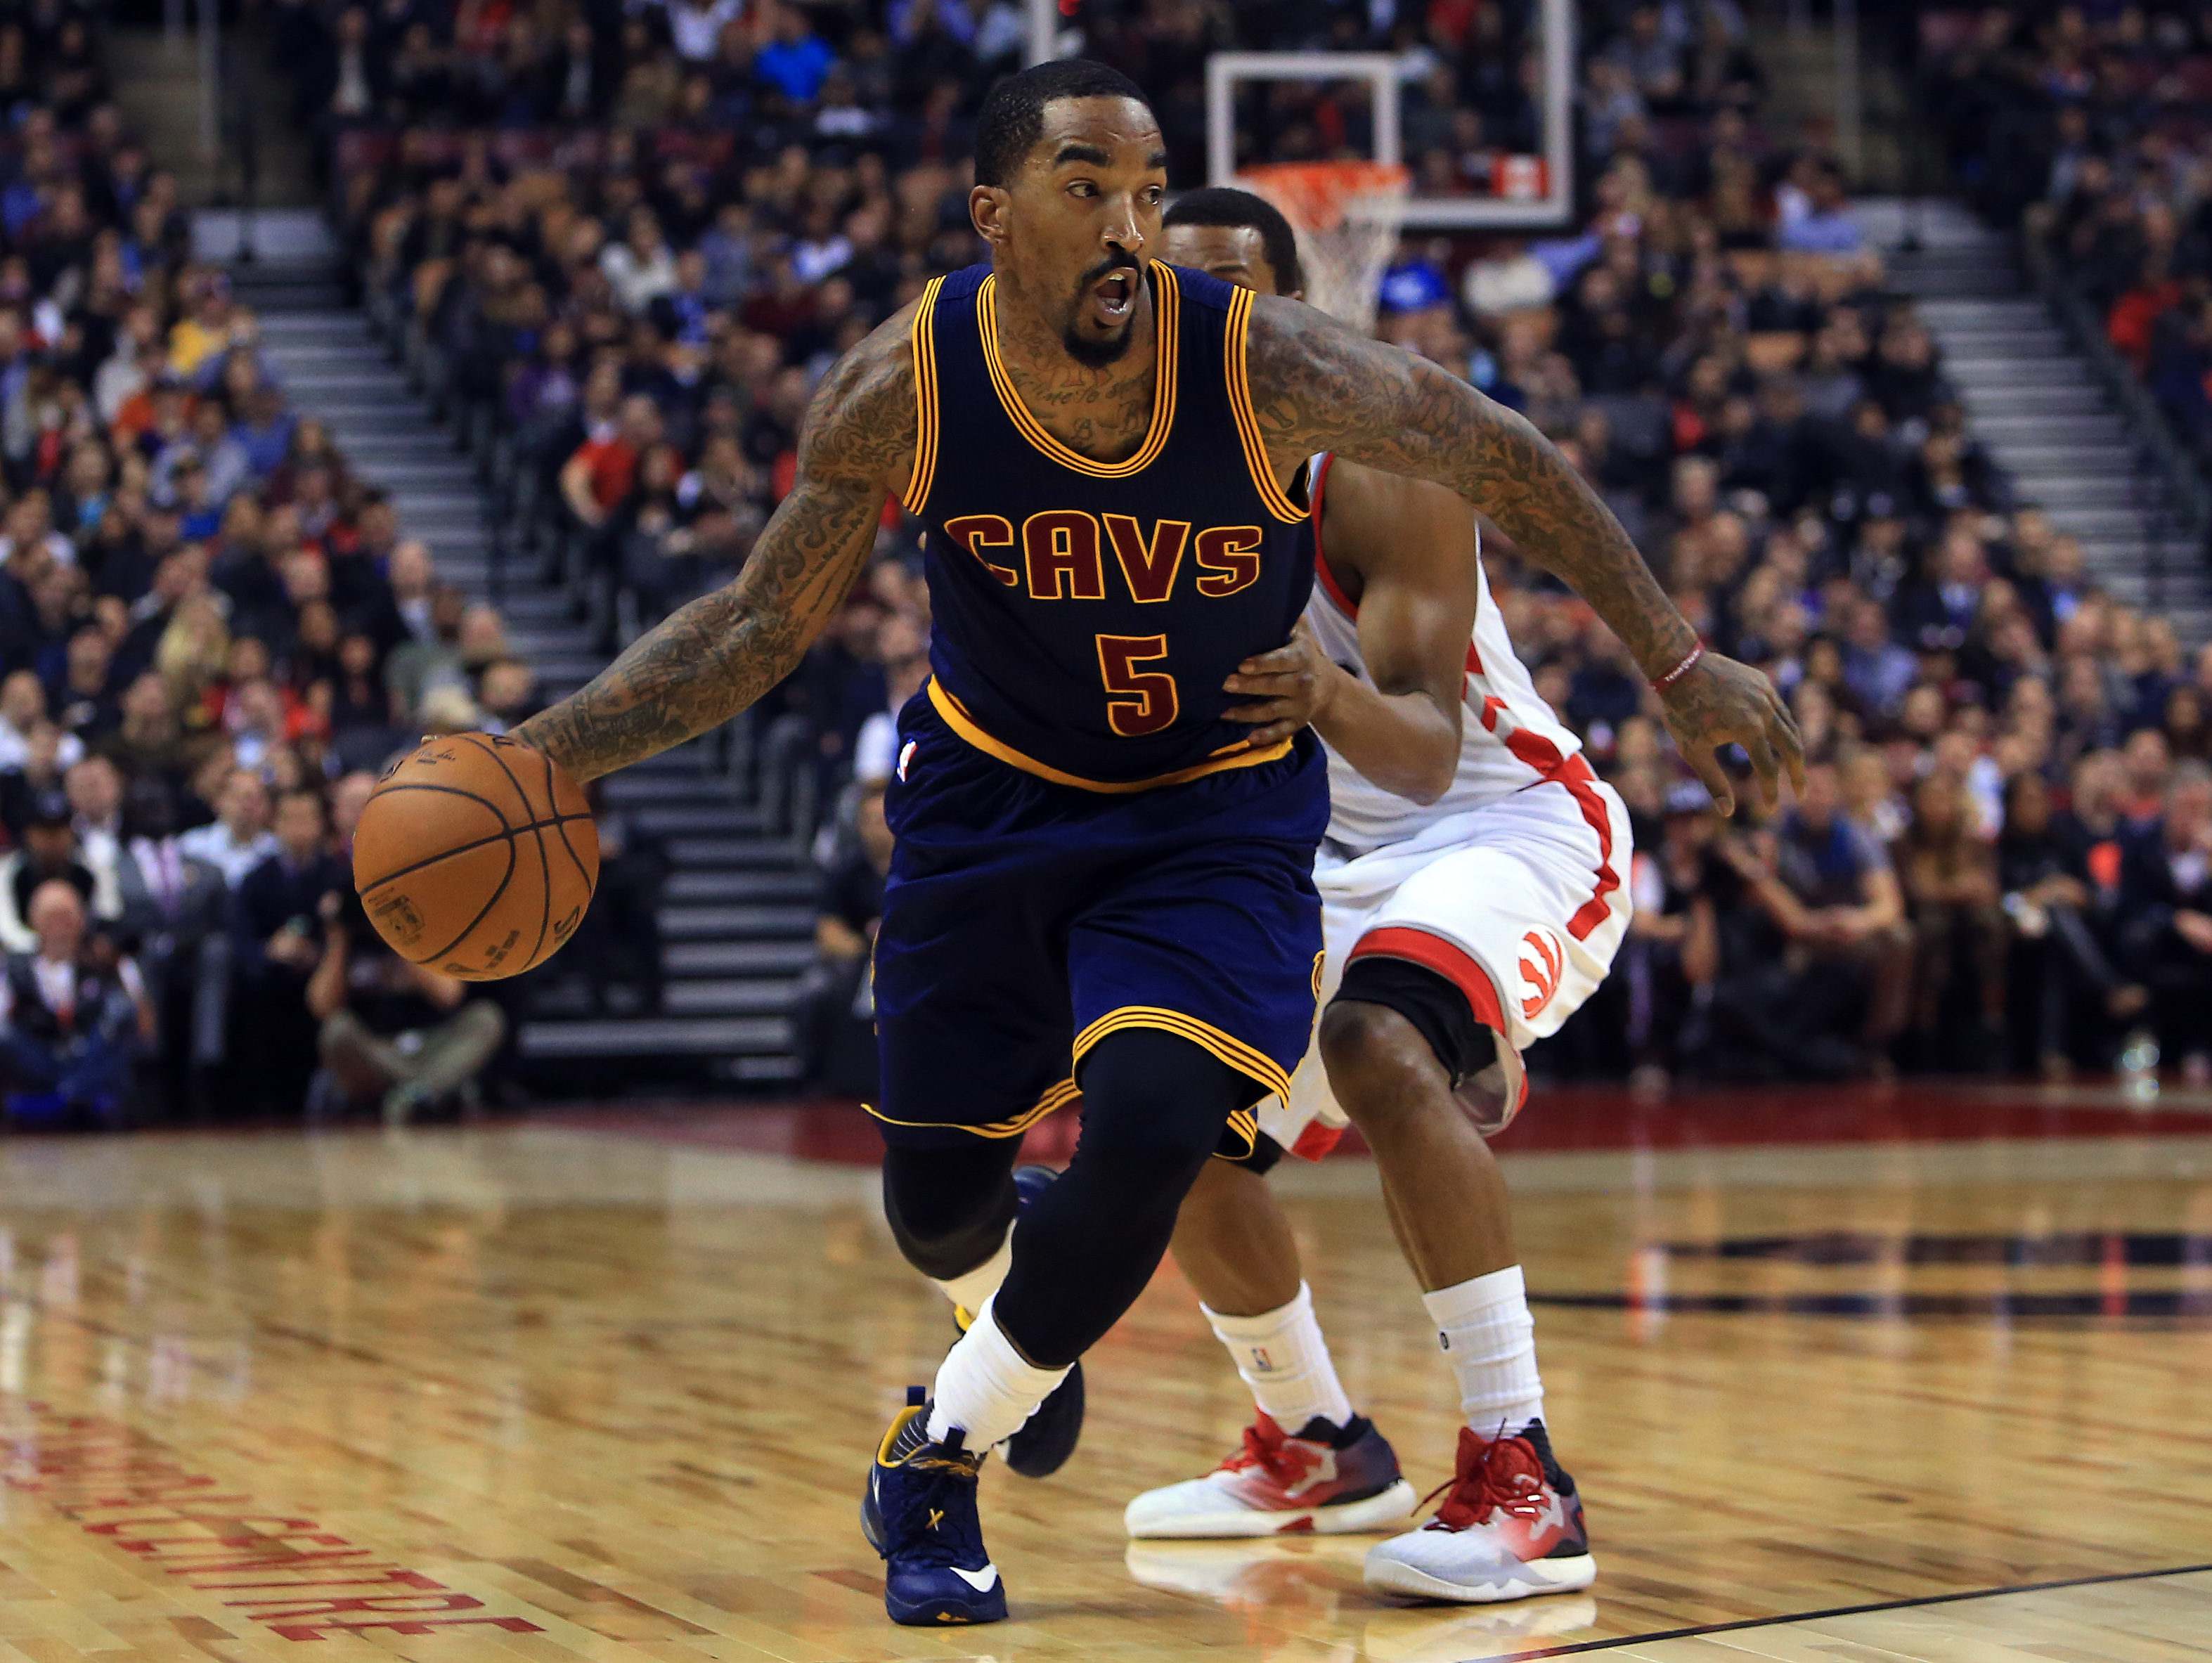 TORONTO, ON - DECEMBER 05: J.R.Smith #5 of the Cleveland Cavaliers dribbles the ball as Kyle Lowry #7 of the Toronto Raptors defends during the first half of an NBA game at Air Canada Centre on December 5, 2016 in Toronto, Canada. NOTE TO USER: User expressly acknowledges and agrees that, by downloading and or using this photograph, User is consenting to the terms and conditions of the Getty Images License Agreement.   Vaughn Ridley/Getty Images/AFP